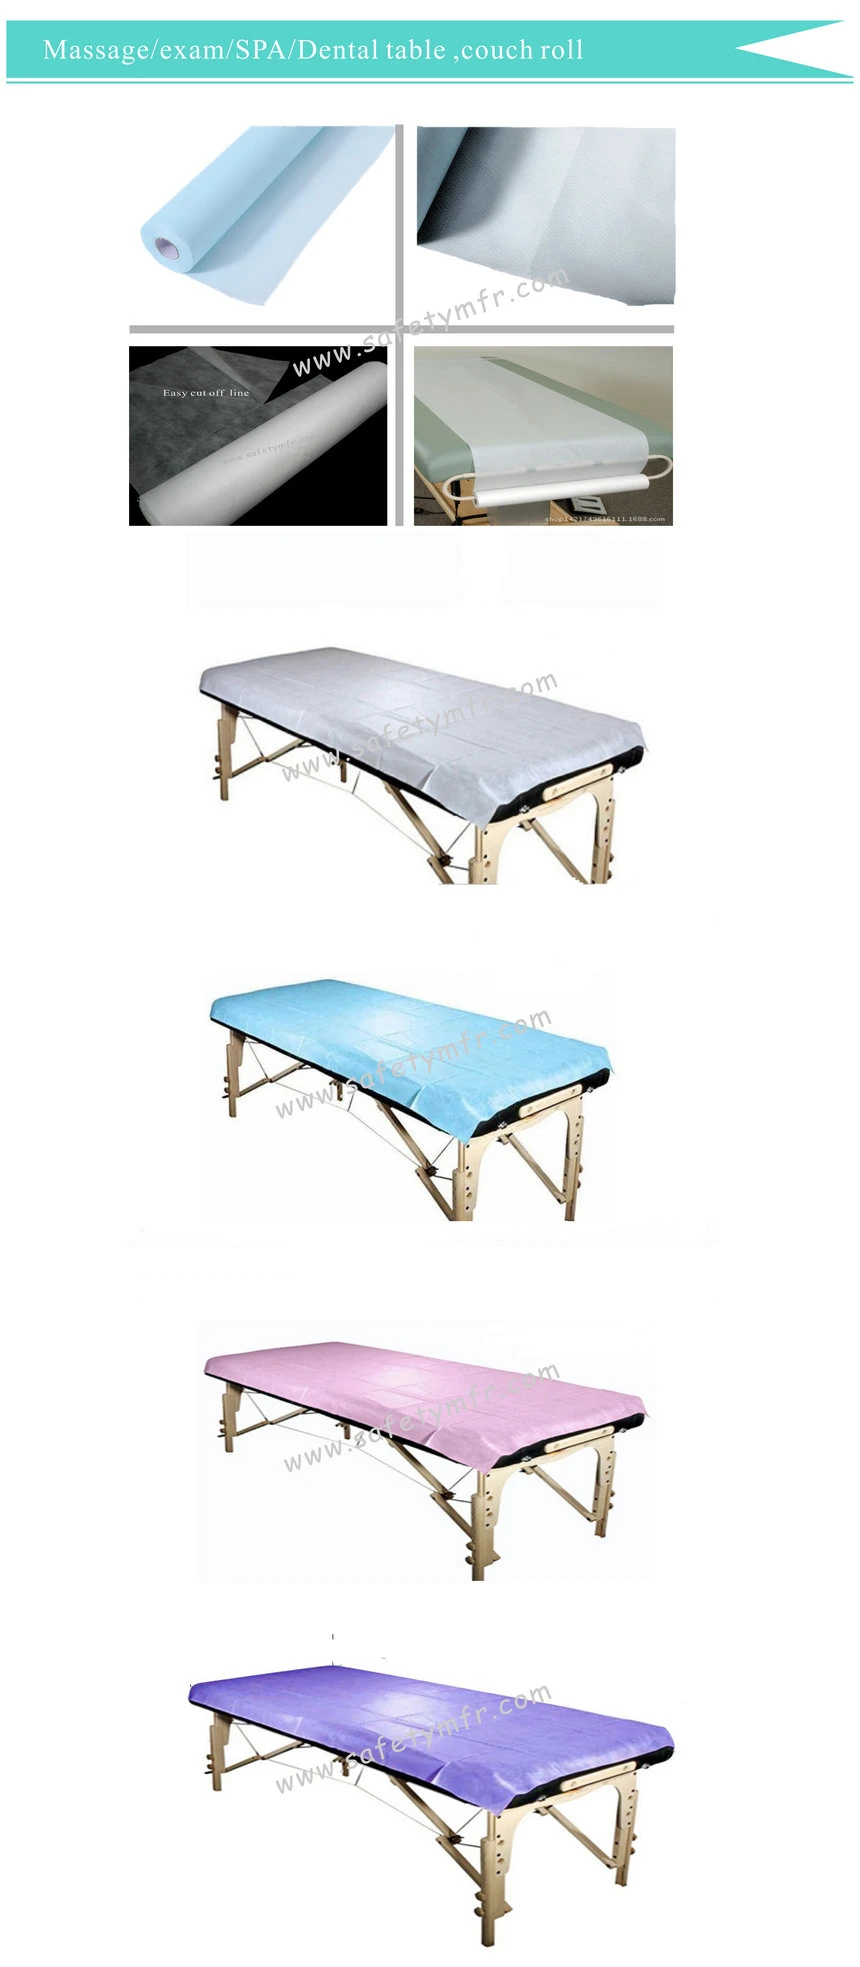 SPA/Salon/Hospital/medial/dental/clinic/ Paper Bedsheet Roll, Perforated Exam Table Nonwoven Disposable bedsheet Roll